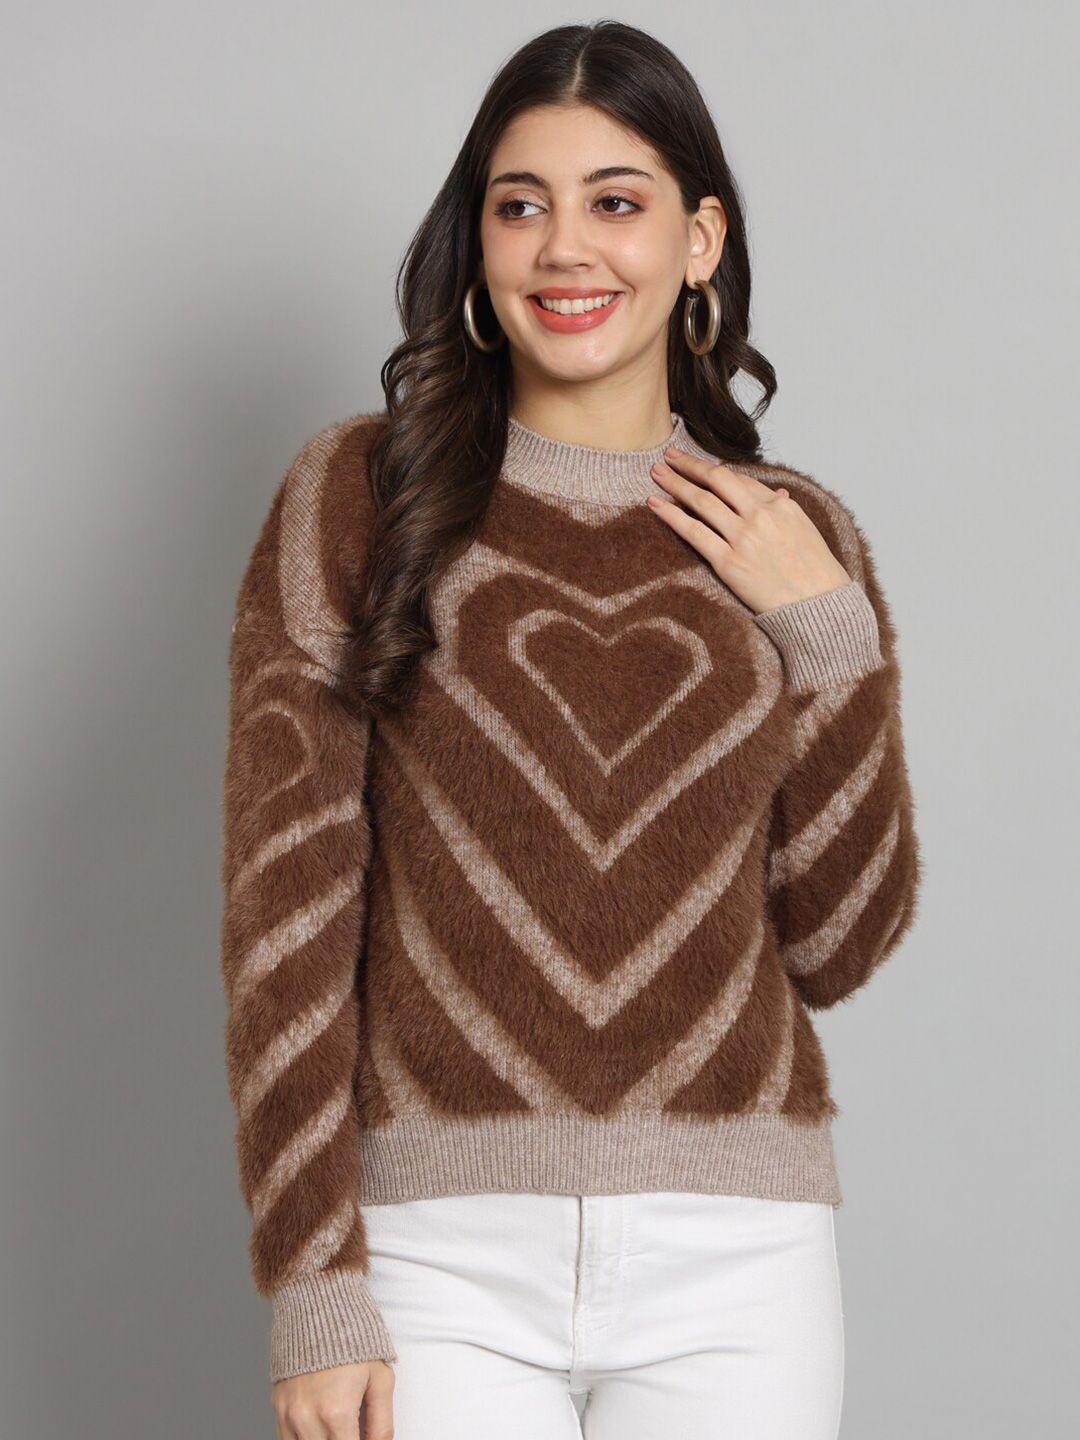 chemistry-quirky-fuzzy-self-design-woolen-pullover-sweater